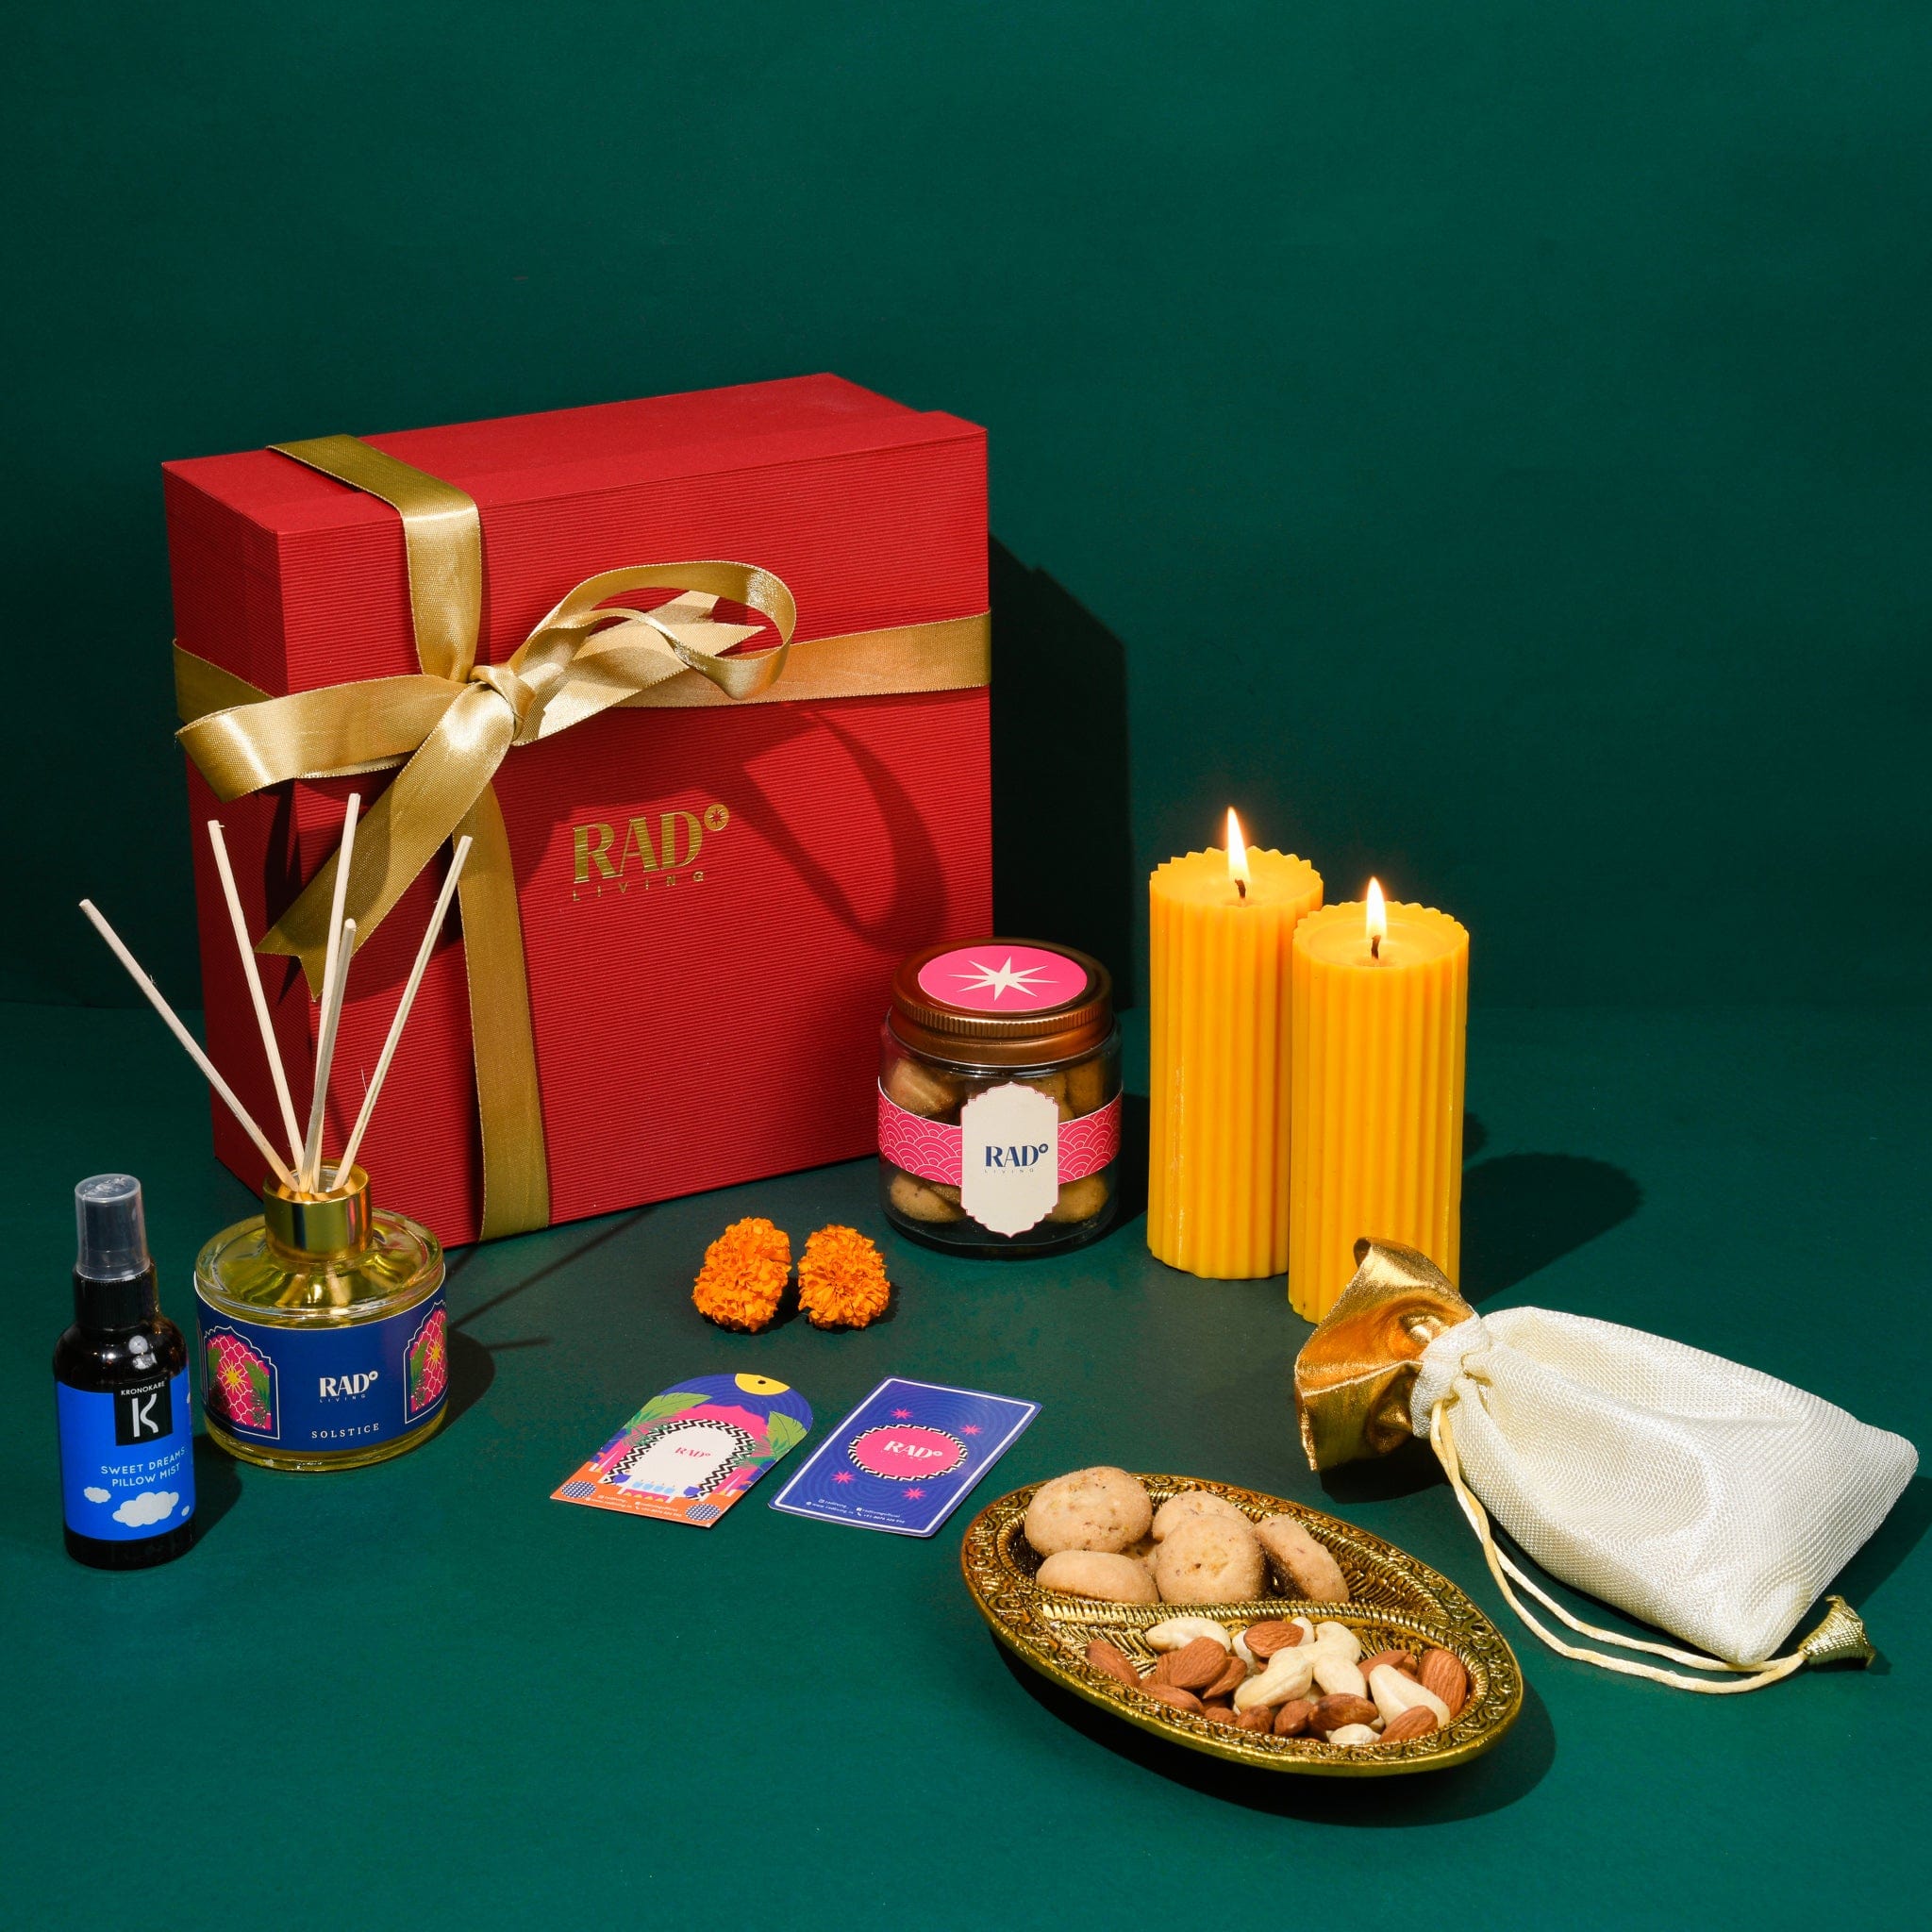 Love and Light Gift Box